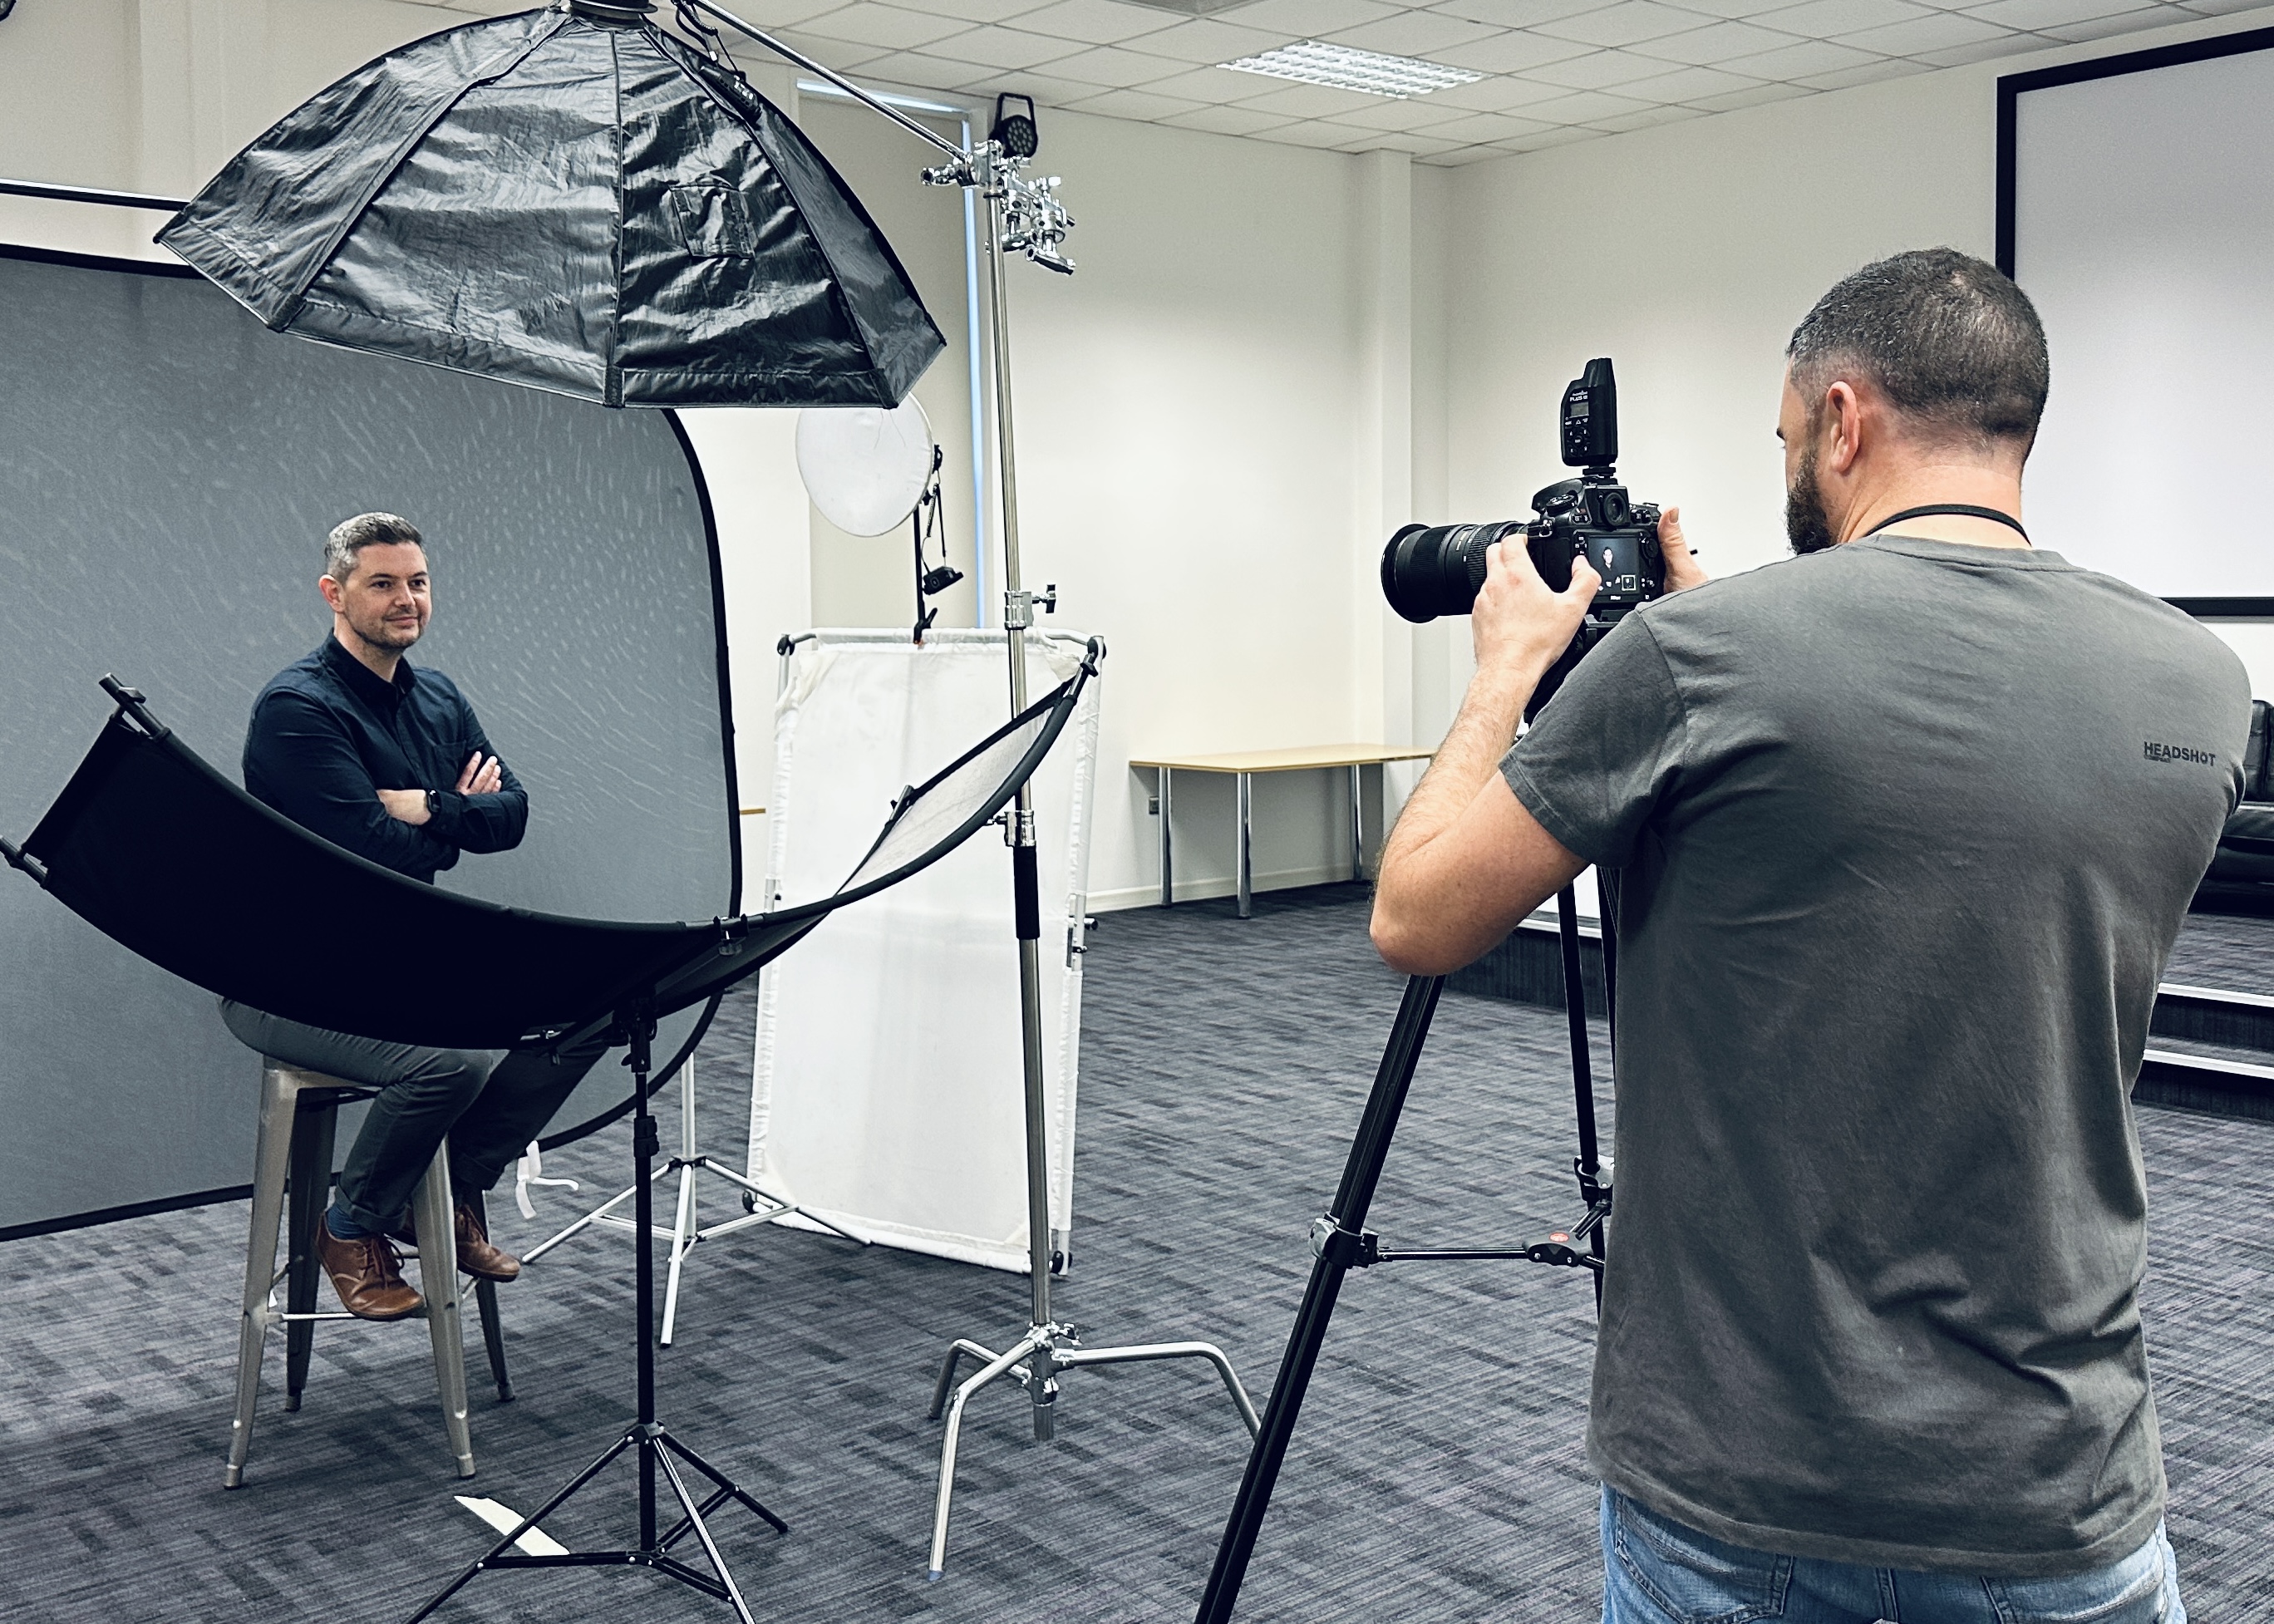 Organising Staff Headshots for your Company